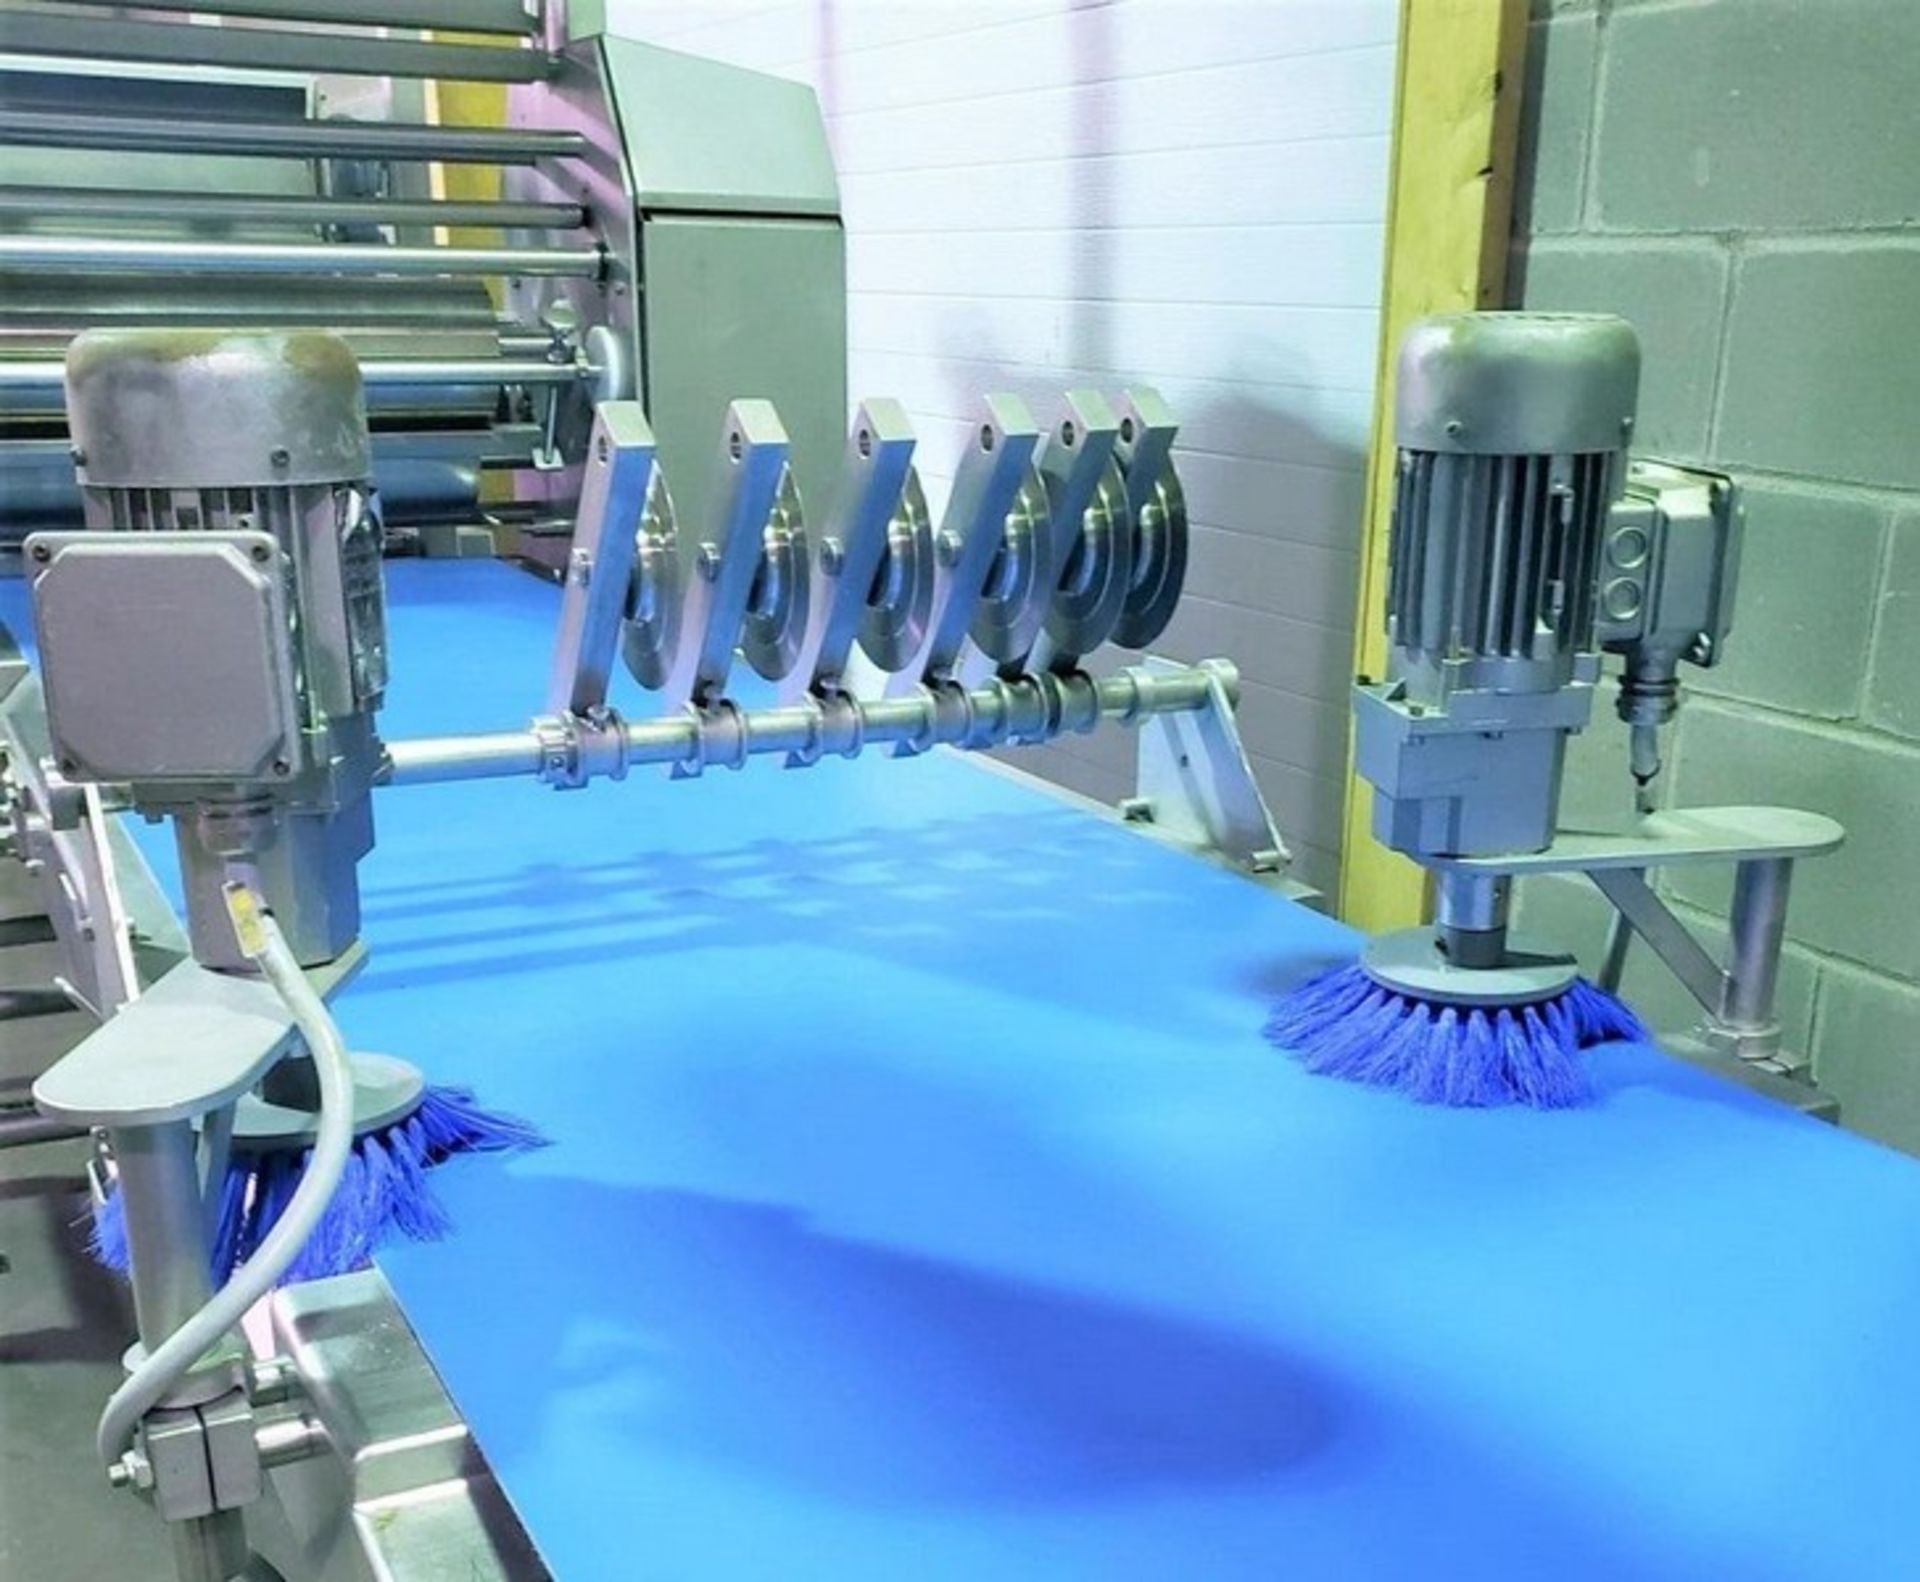 Tromp Bakery Line multi-purpose S/S Combines Dough and Flour Depositin, With Roller Sheeting, Fold - Image 6 of 11